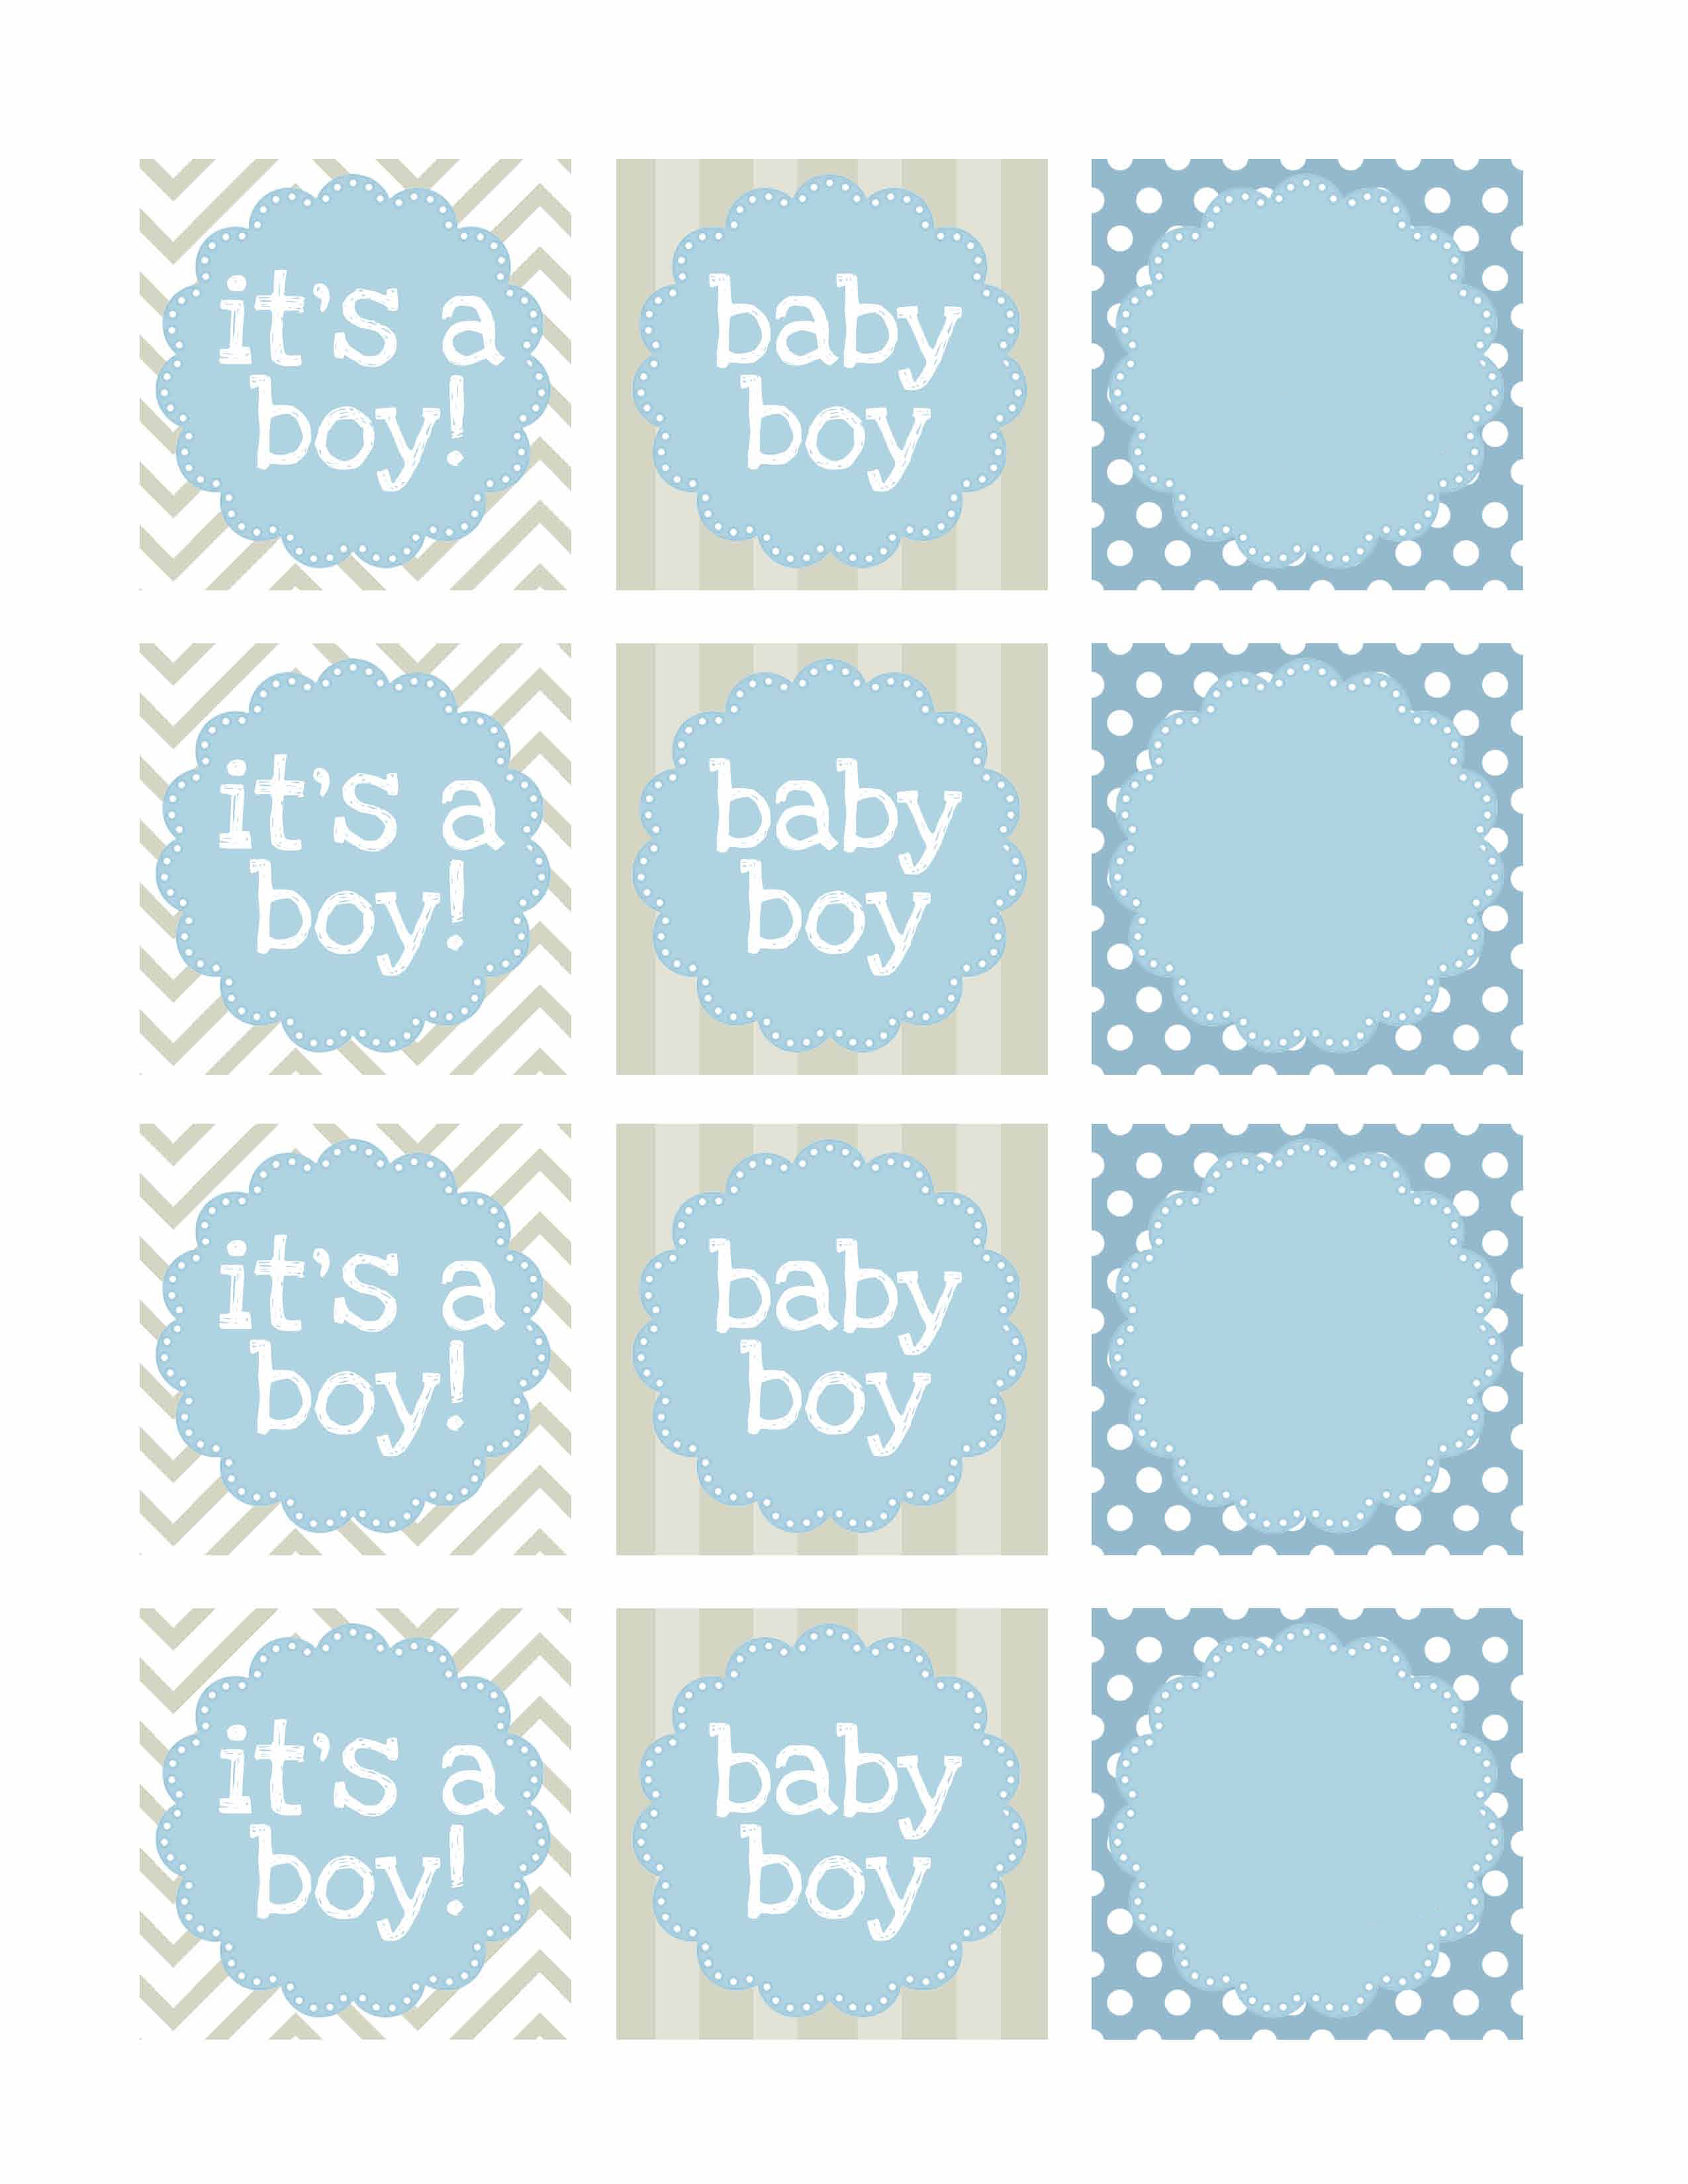 free-printable-baby-shower-gift-tags-template-baby-shower-favor-tag